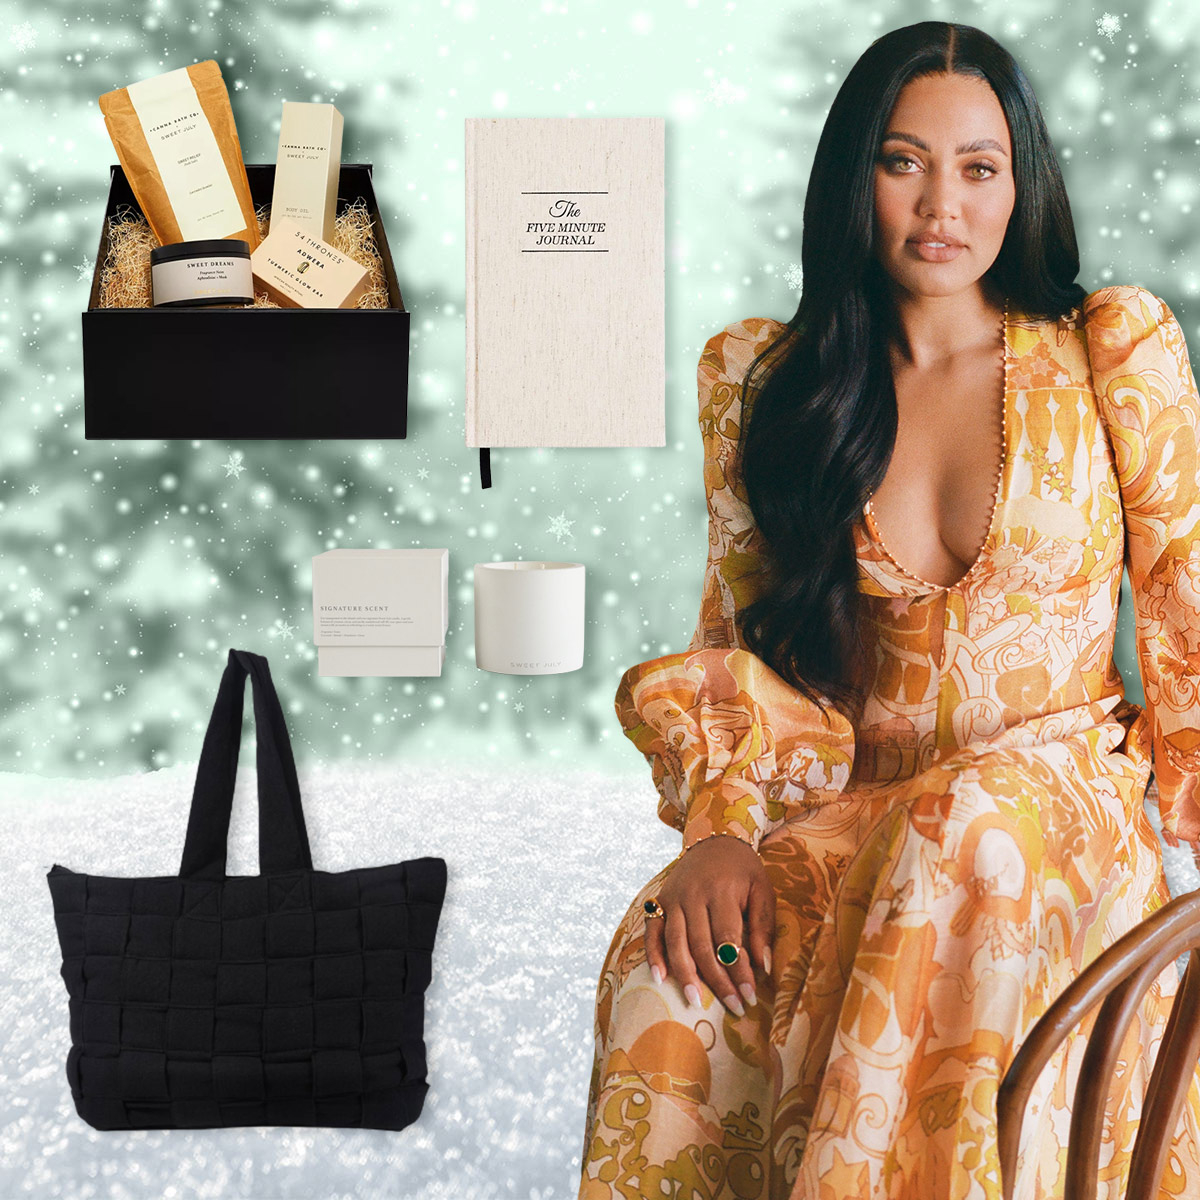 https://akns-images.eonline.com/eol_images/Entire_Site/20221113/rs_1200x1200-221213100733-1200-ayesha-curry-gift-guide-LT-121322.jpg?fit=around%7C1080:1080&output-quality=90&crop=1080:1080;center,top